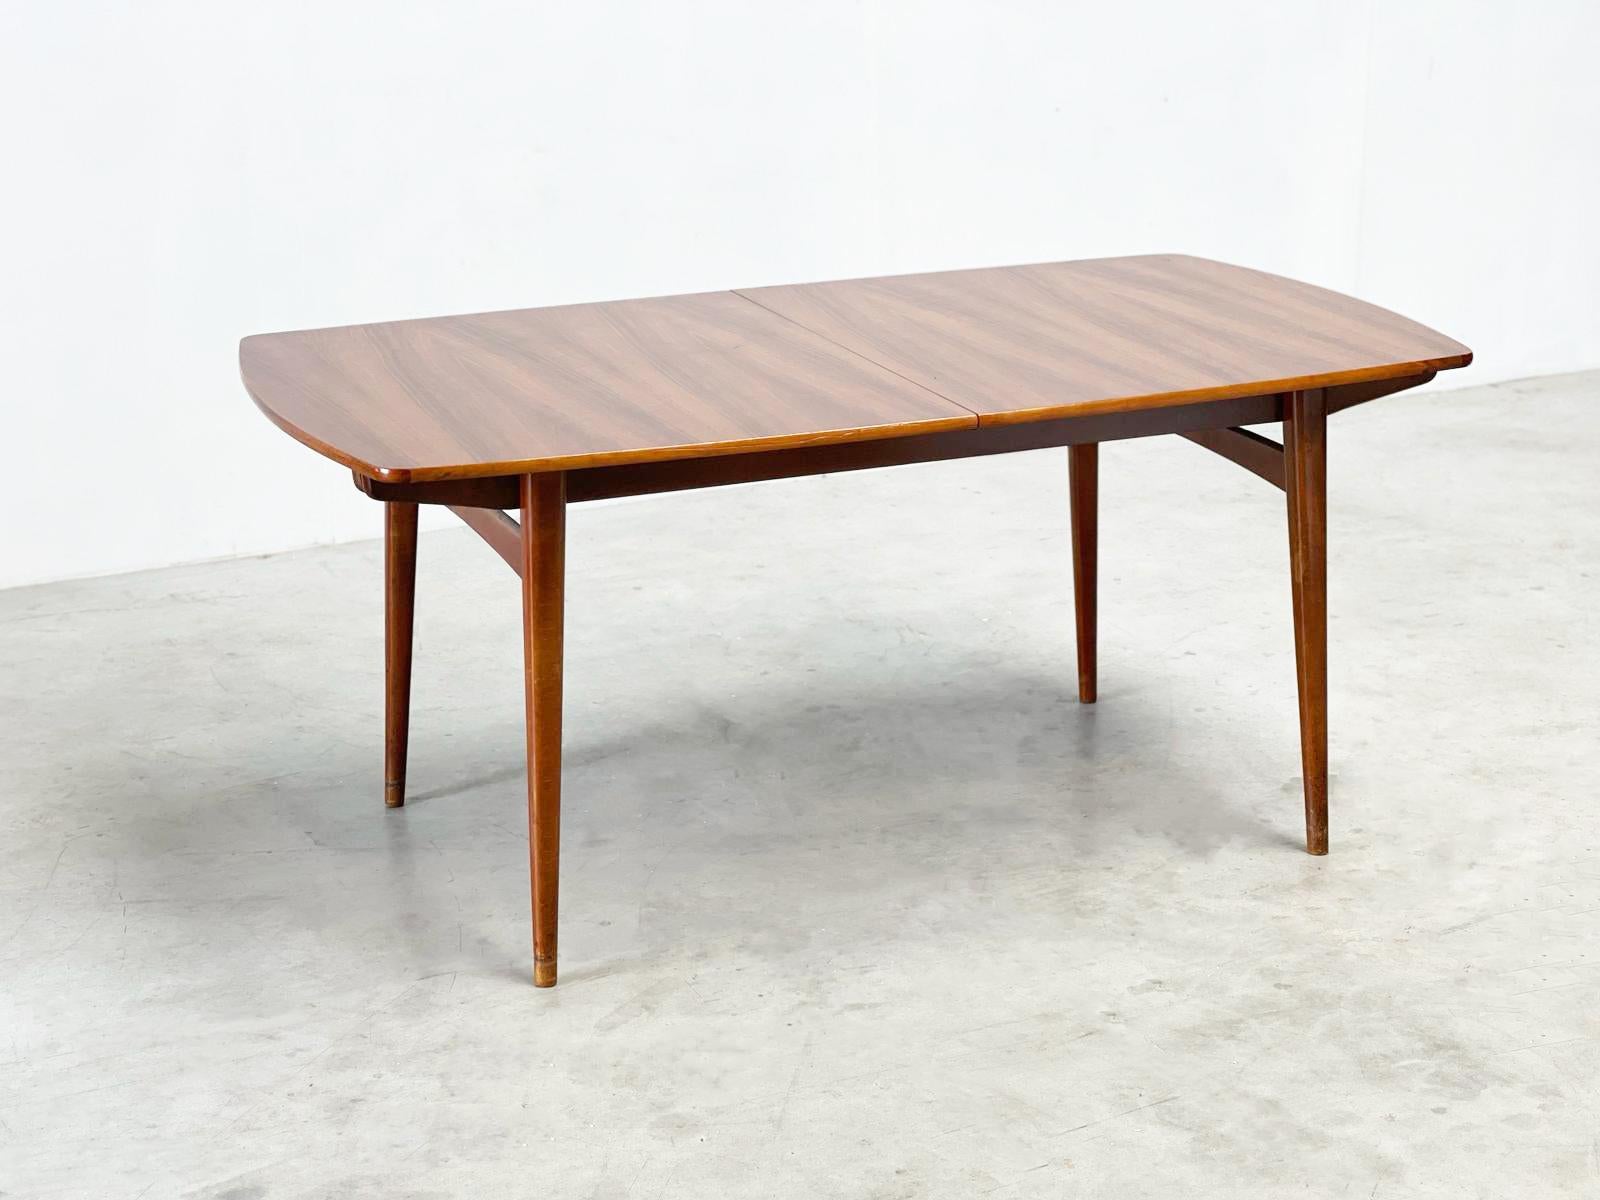 William Watting for Fristho extendable dining table
 

A vintage extendable dining table, designed by William Watting for Fristho in the 1950s, it gives perfect the impression of mid-century elegance. Its timeless design and functional versatility